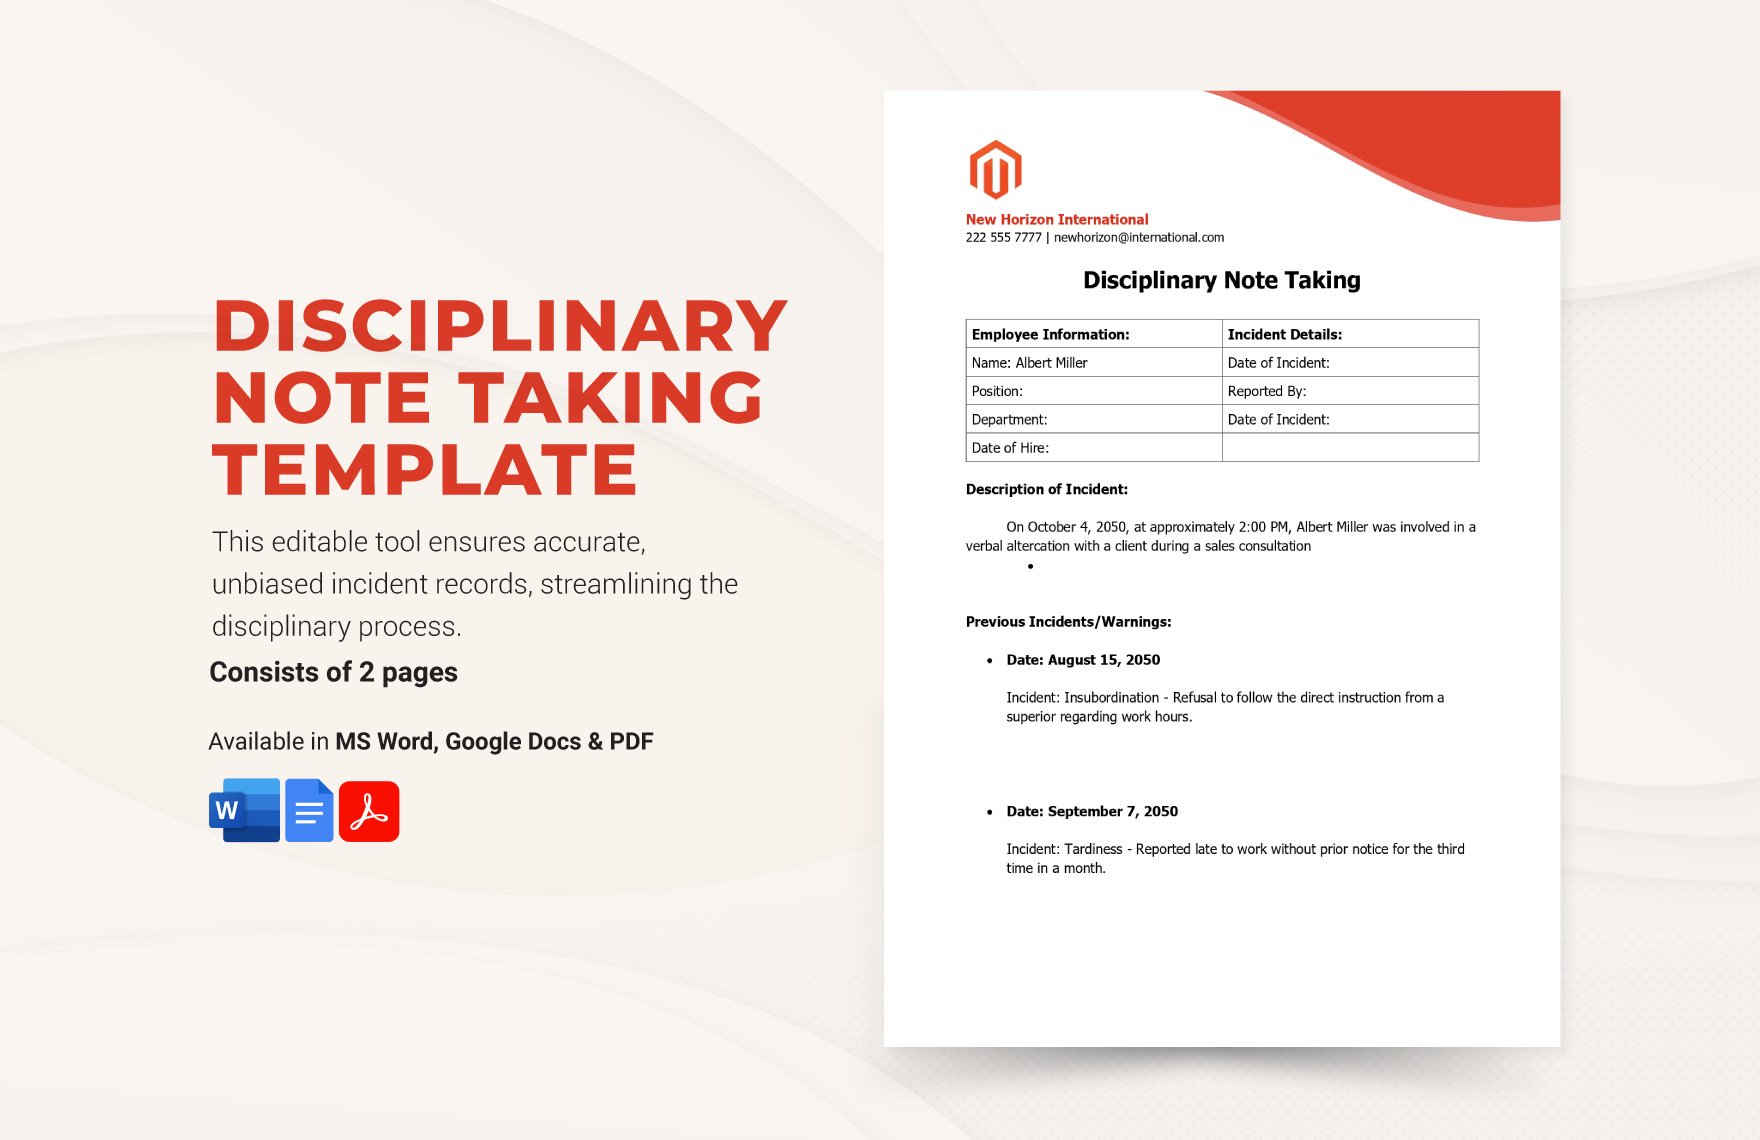 Disciplinary Note Taking Template